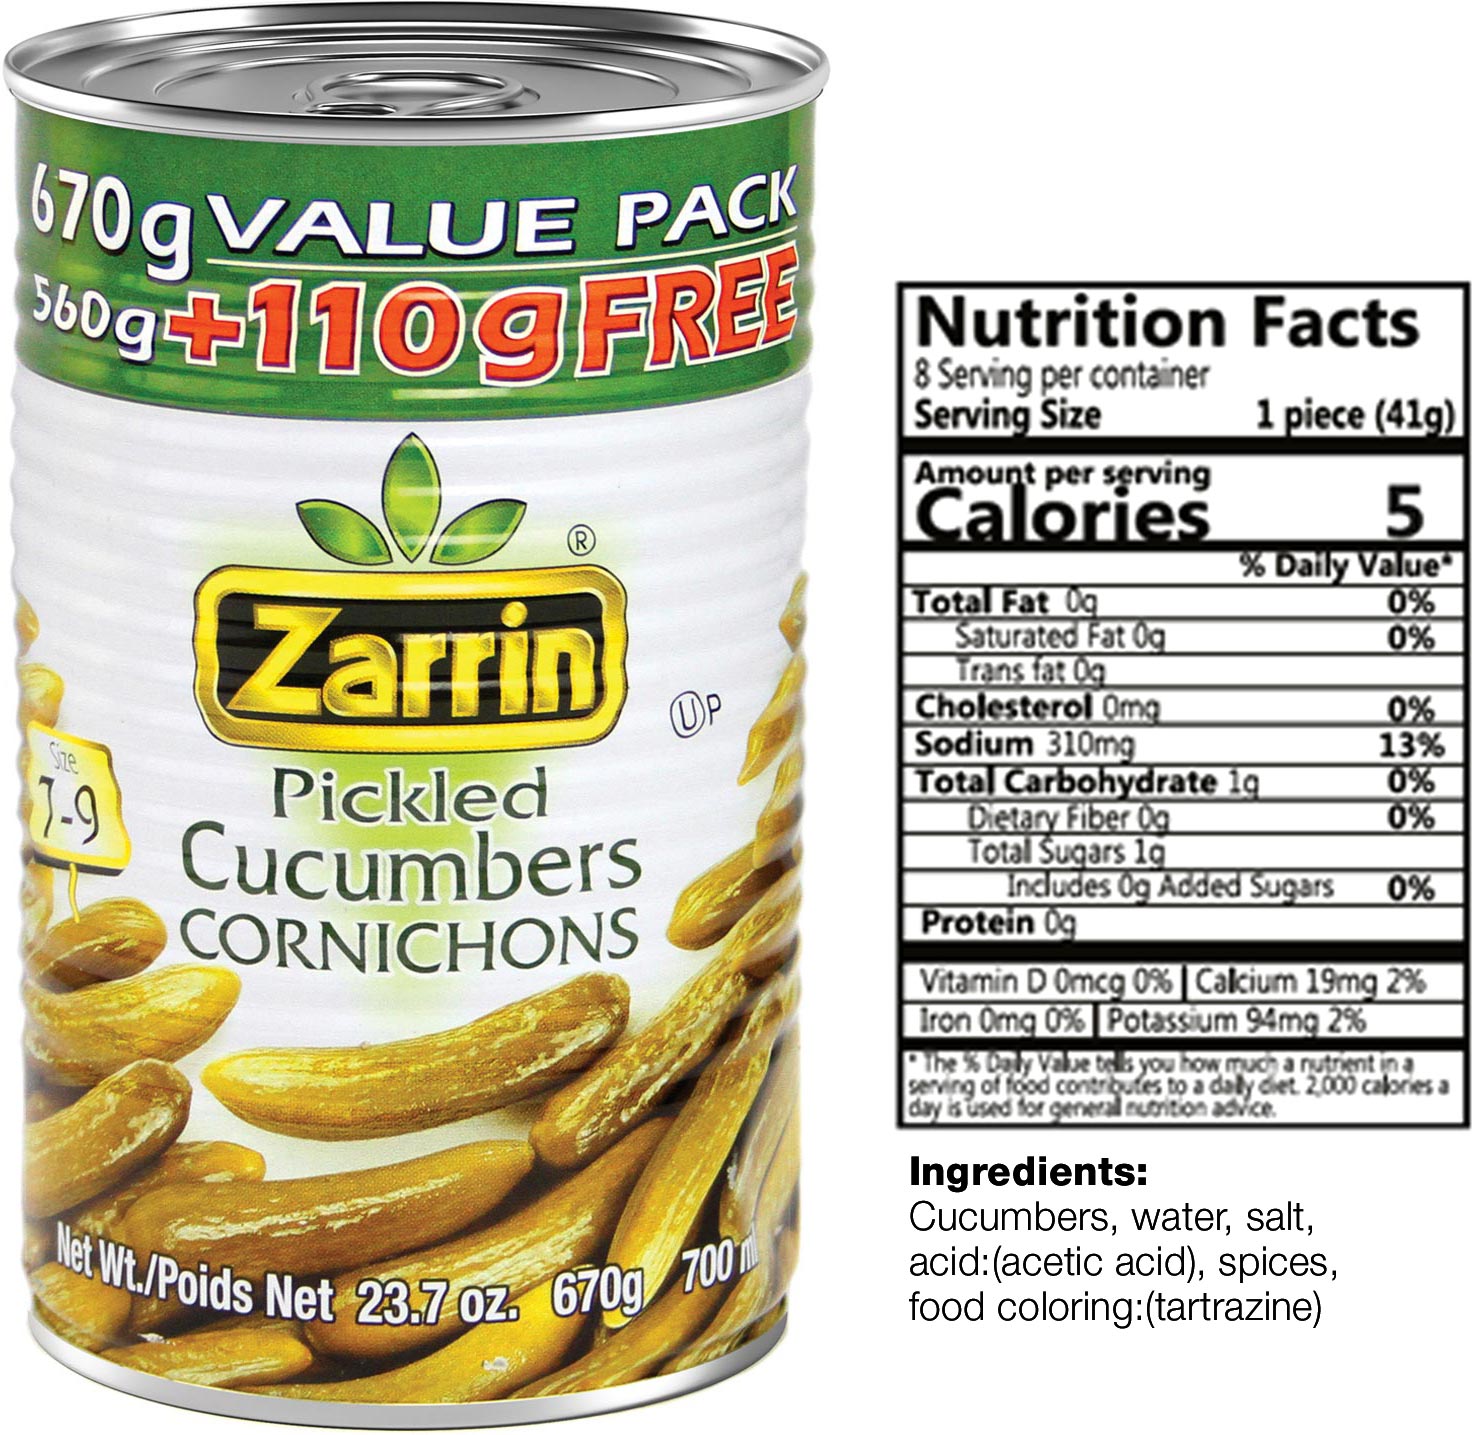 Zarrin pickled cucumbers size 7-9 plus 110g for free.